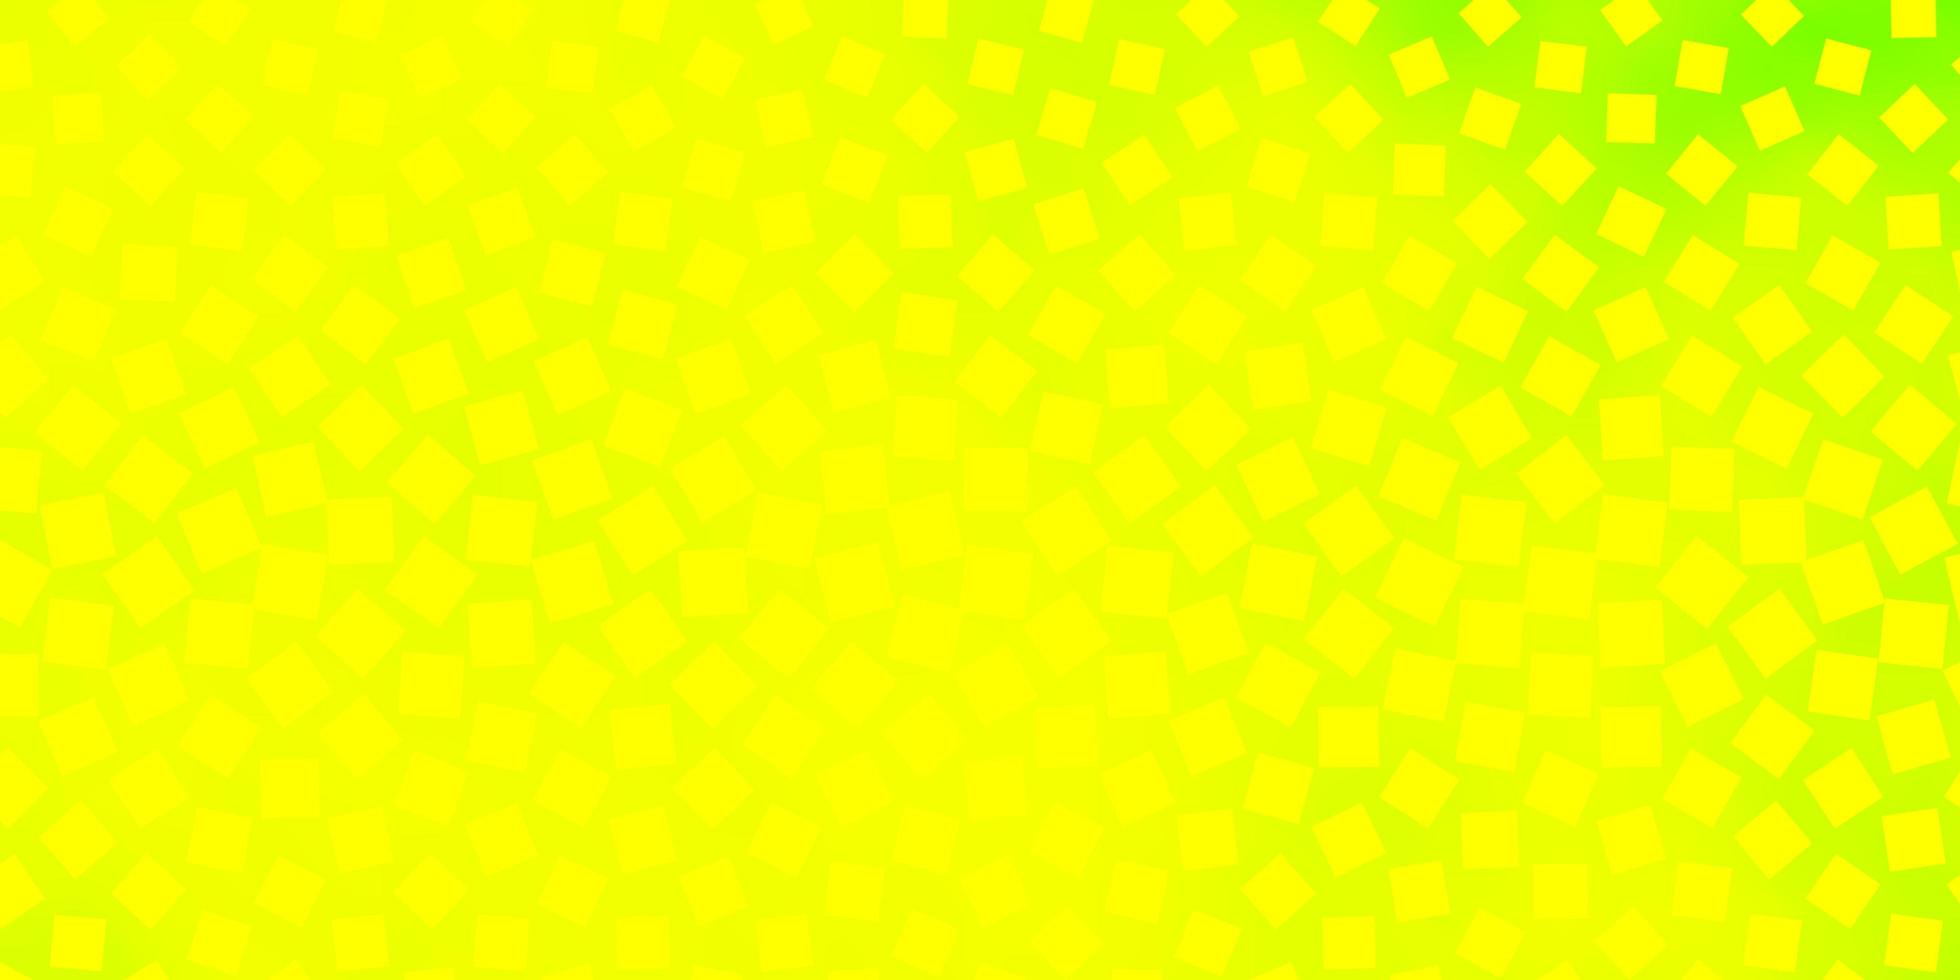 Light Green, Yellow vector backdrop with rectangles. Modern design with rectangles in abstract style. Pattern for busines booklets, leaflets